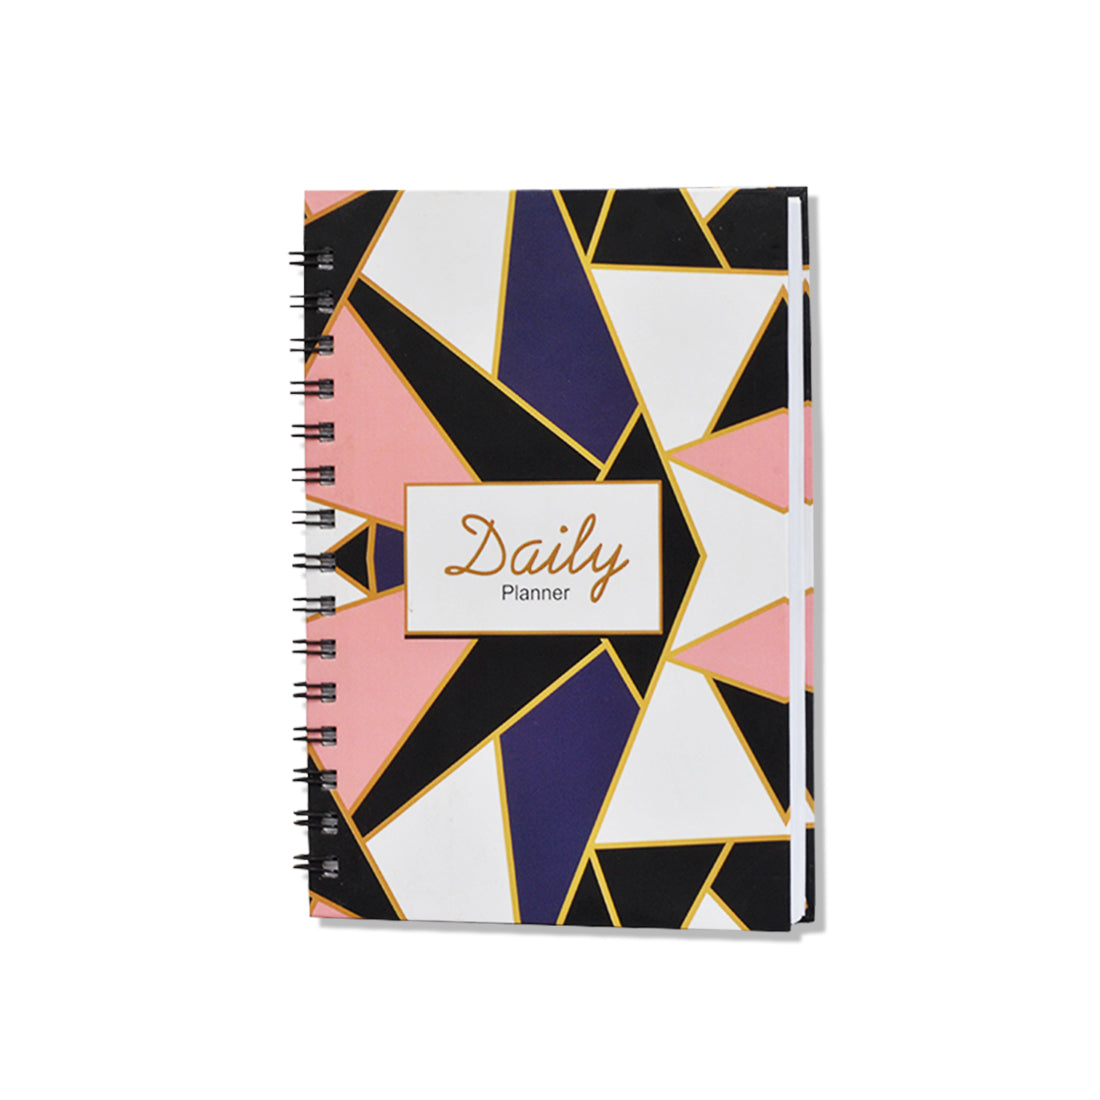 Student Planner – Academic Planner with Abstract Design, Notes, Meals, to Do List and Hard Cover with Strong Black Double Spiral Binding